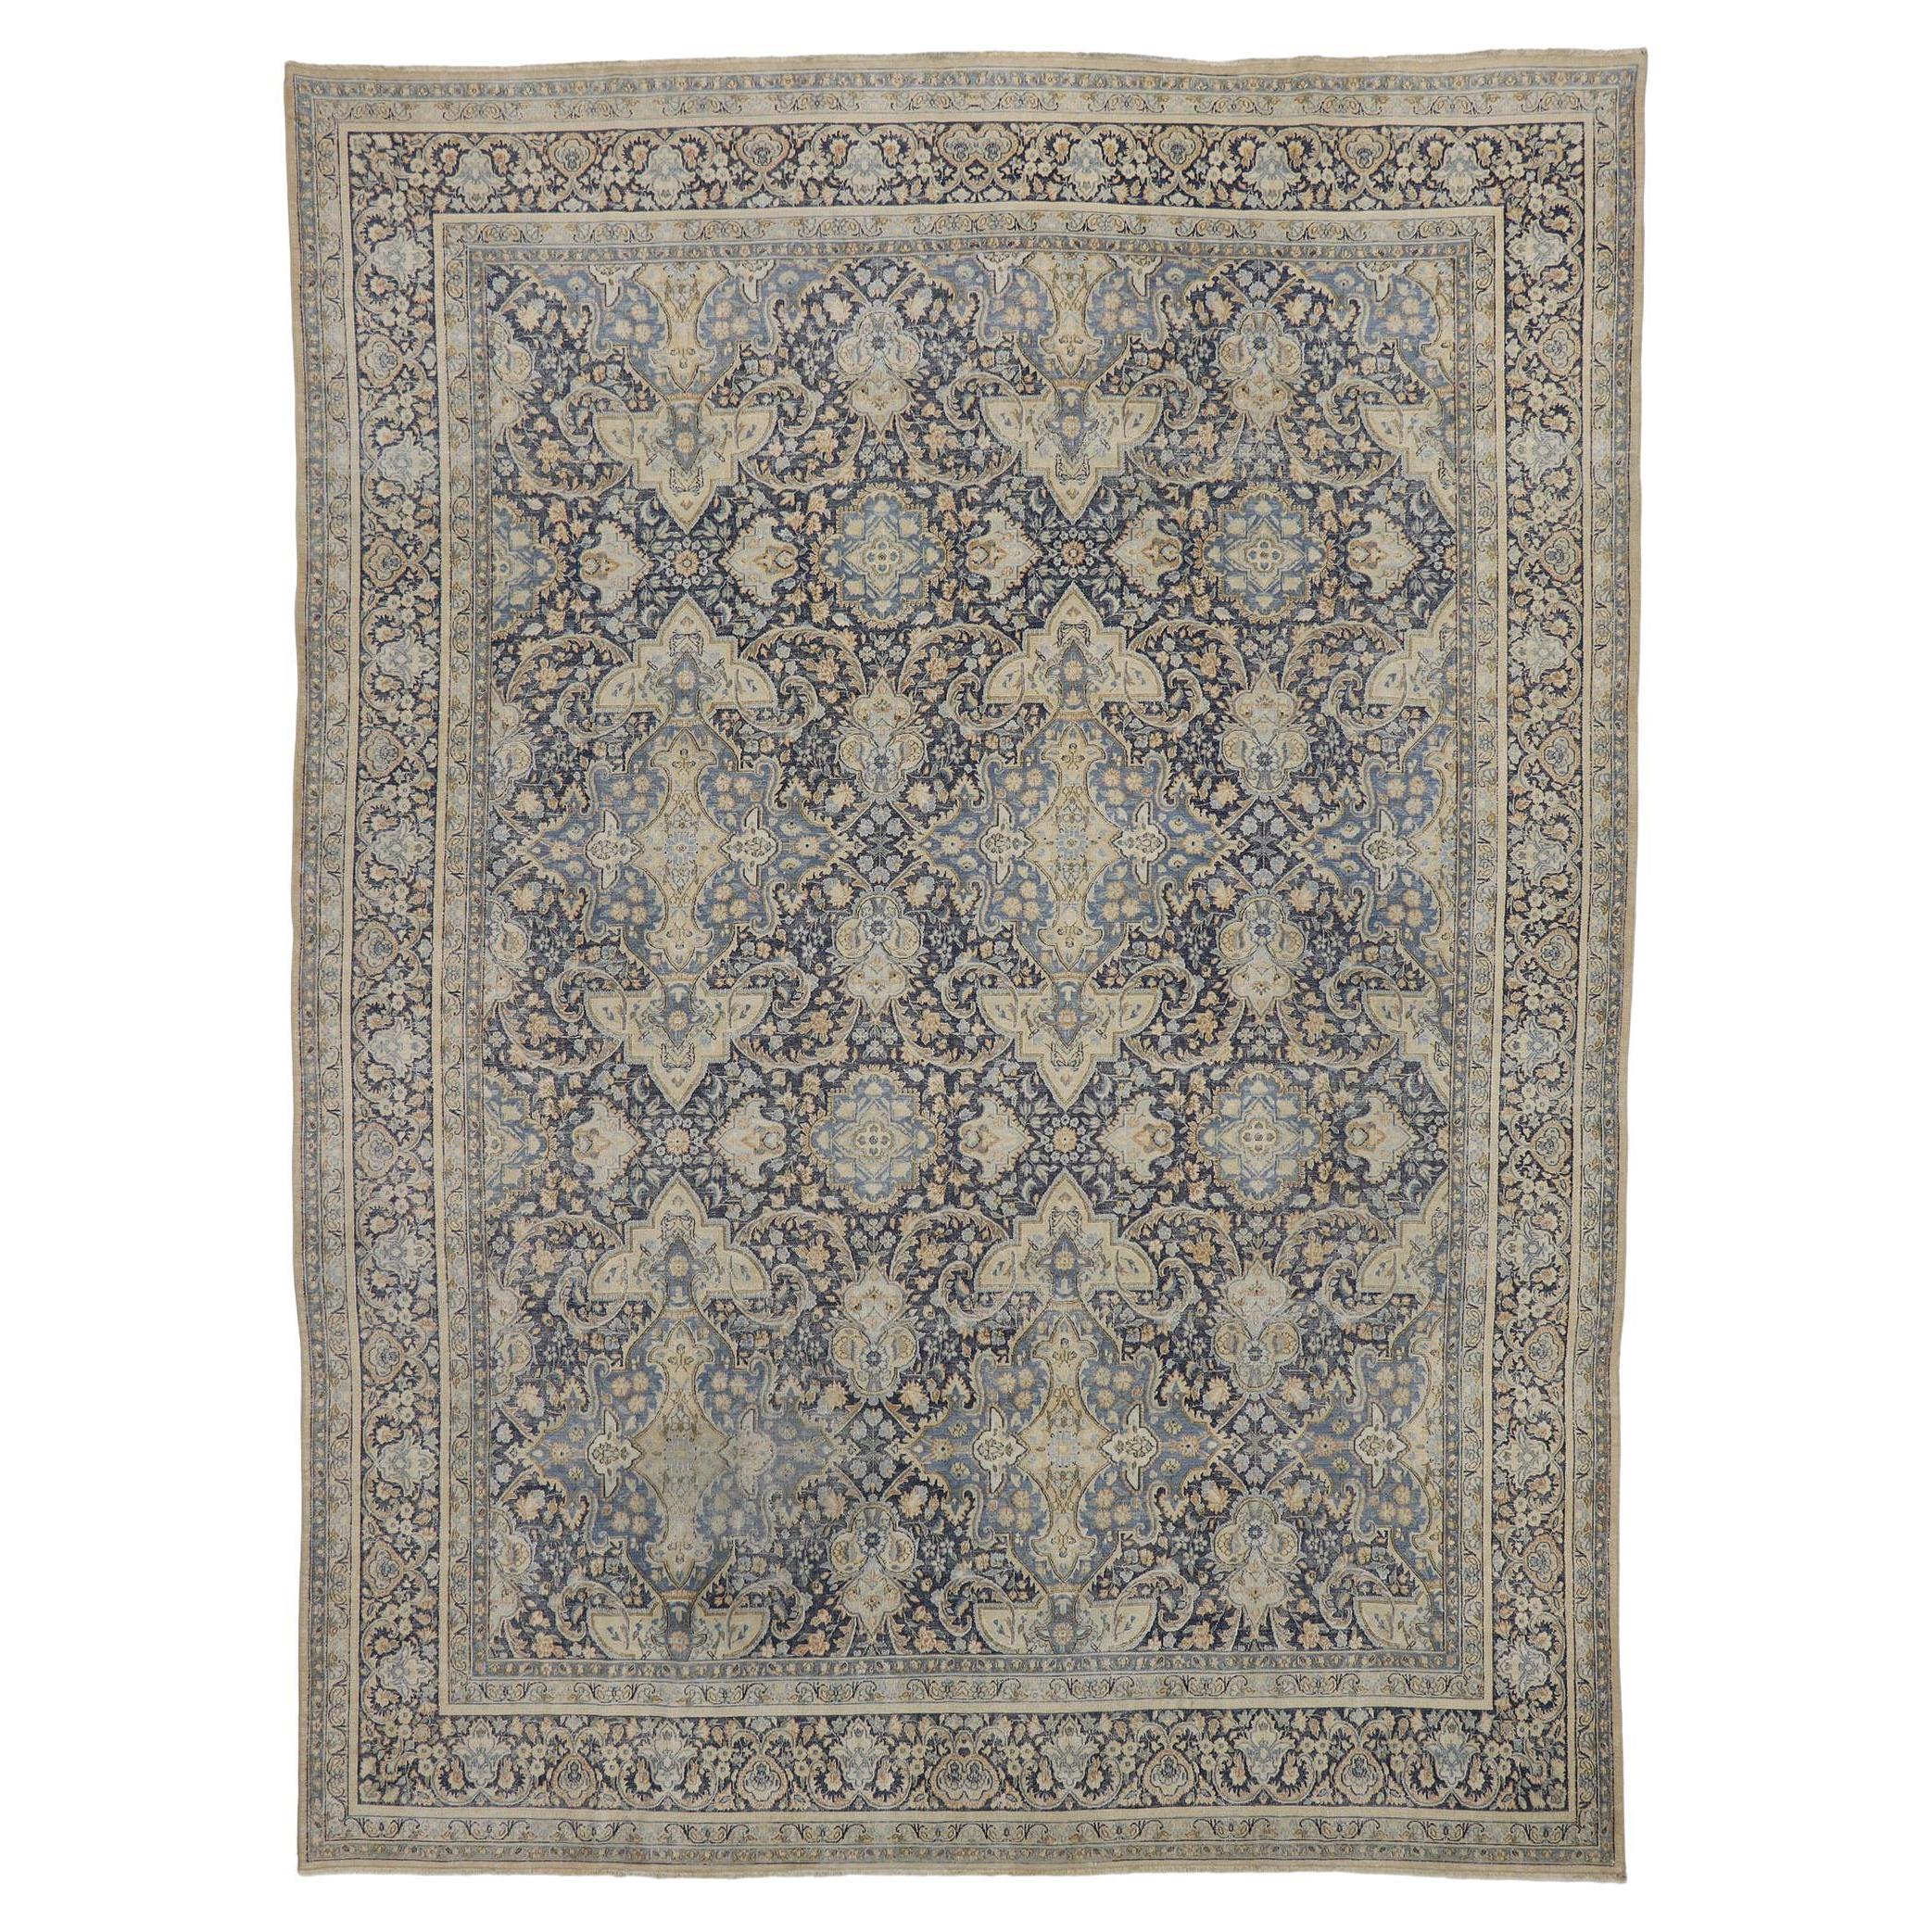 Distressed Antique Persian Kerman Rug with Rustic Style For Sale